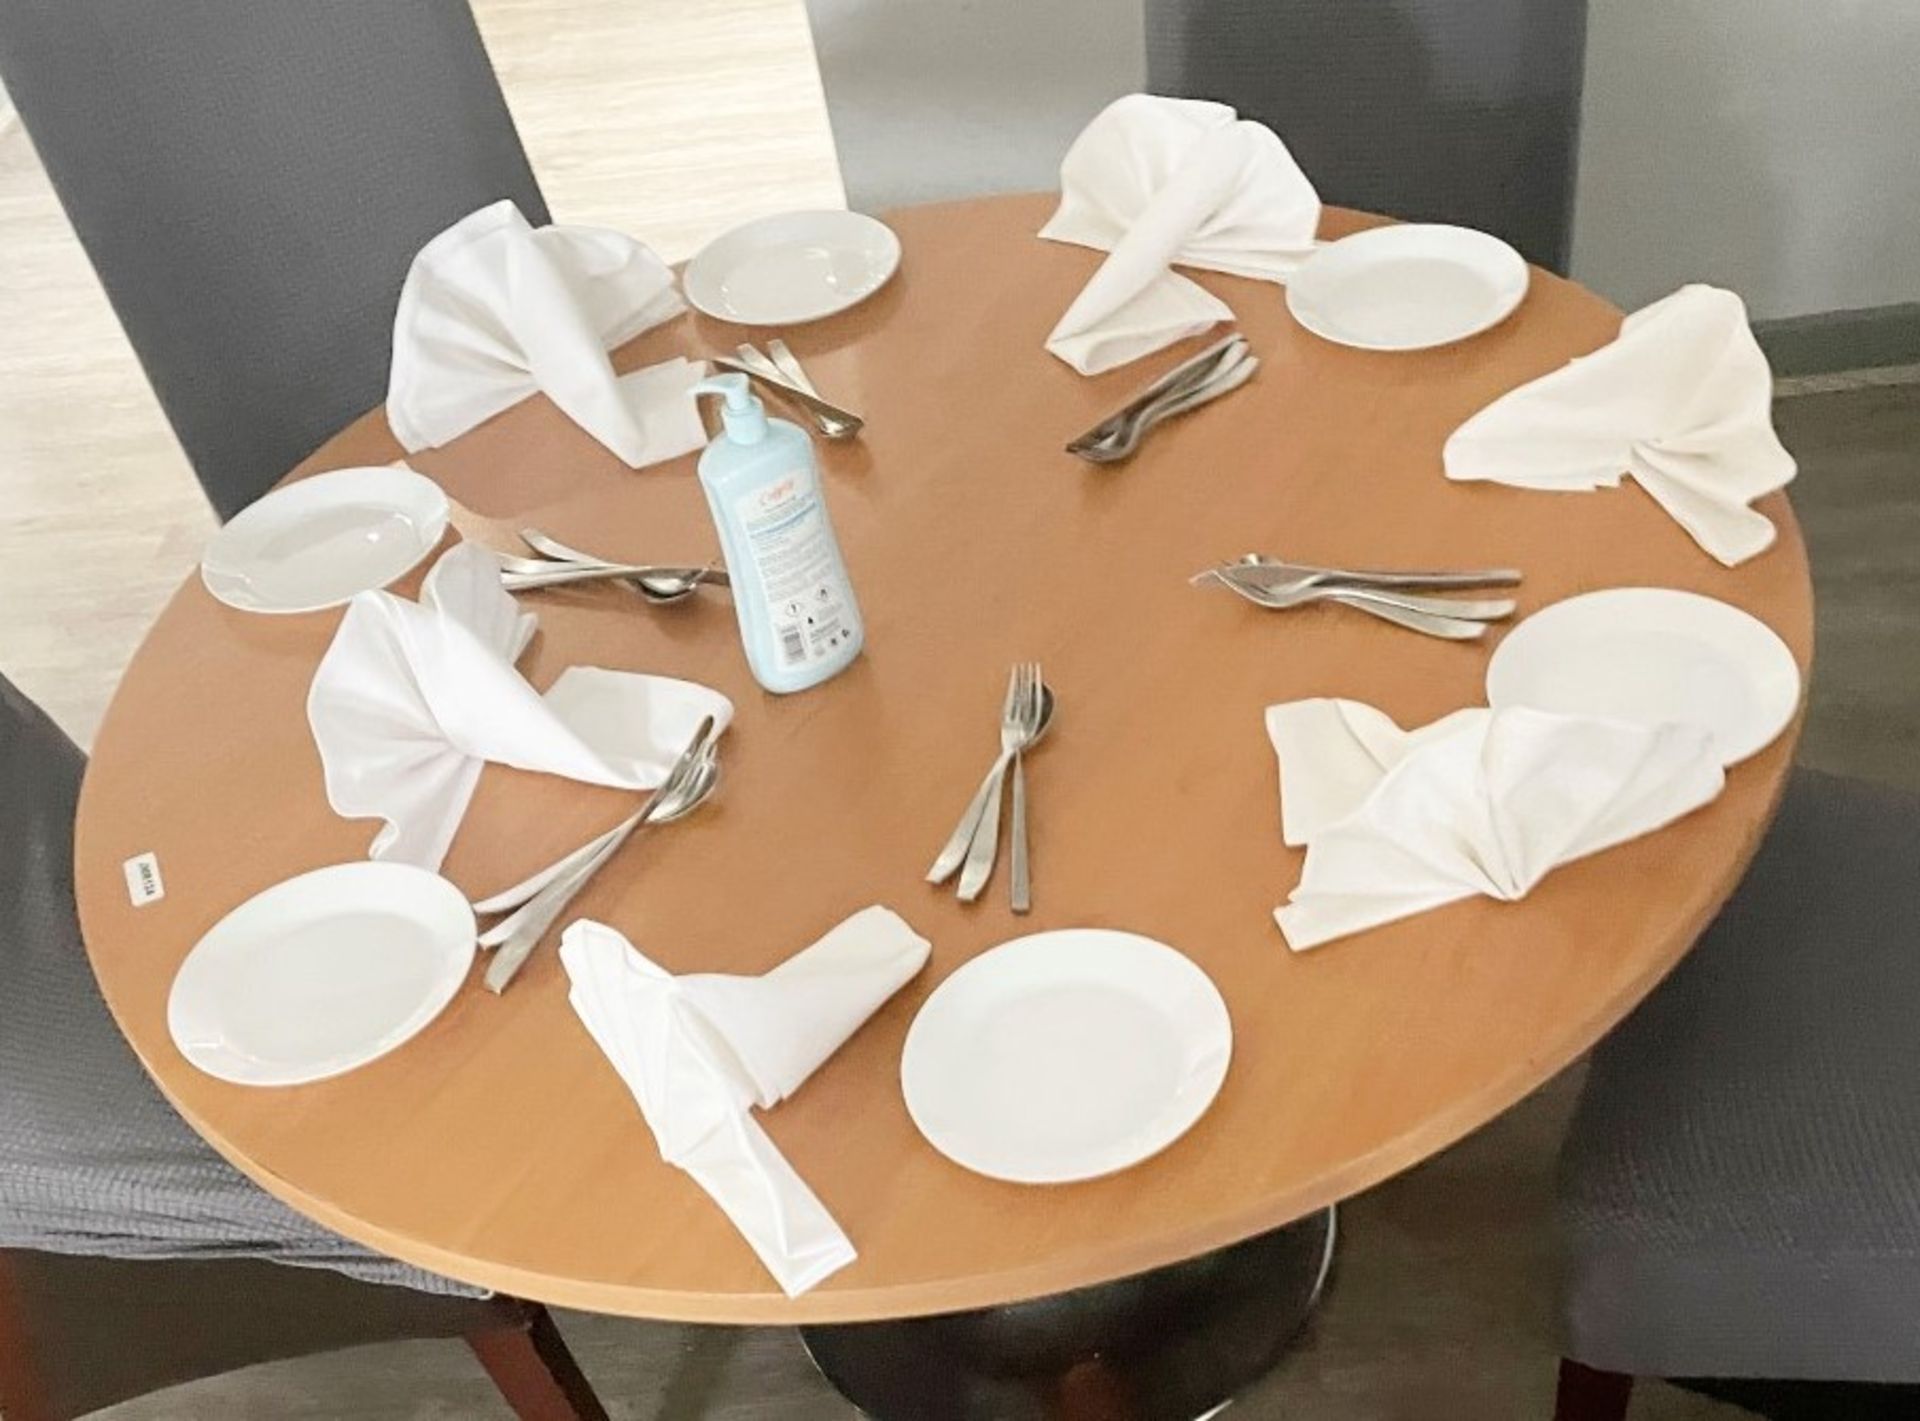 50 x White Dinner Plates, 50 x Fabric Napkins and 150 x Pieces of Contemporary Cutlery - Ref: JMR000